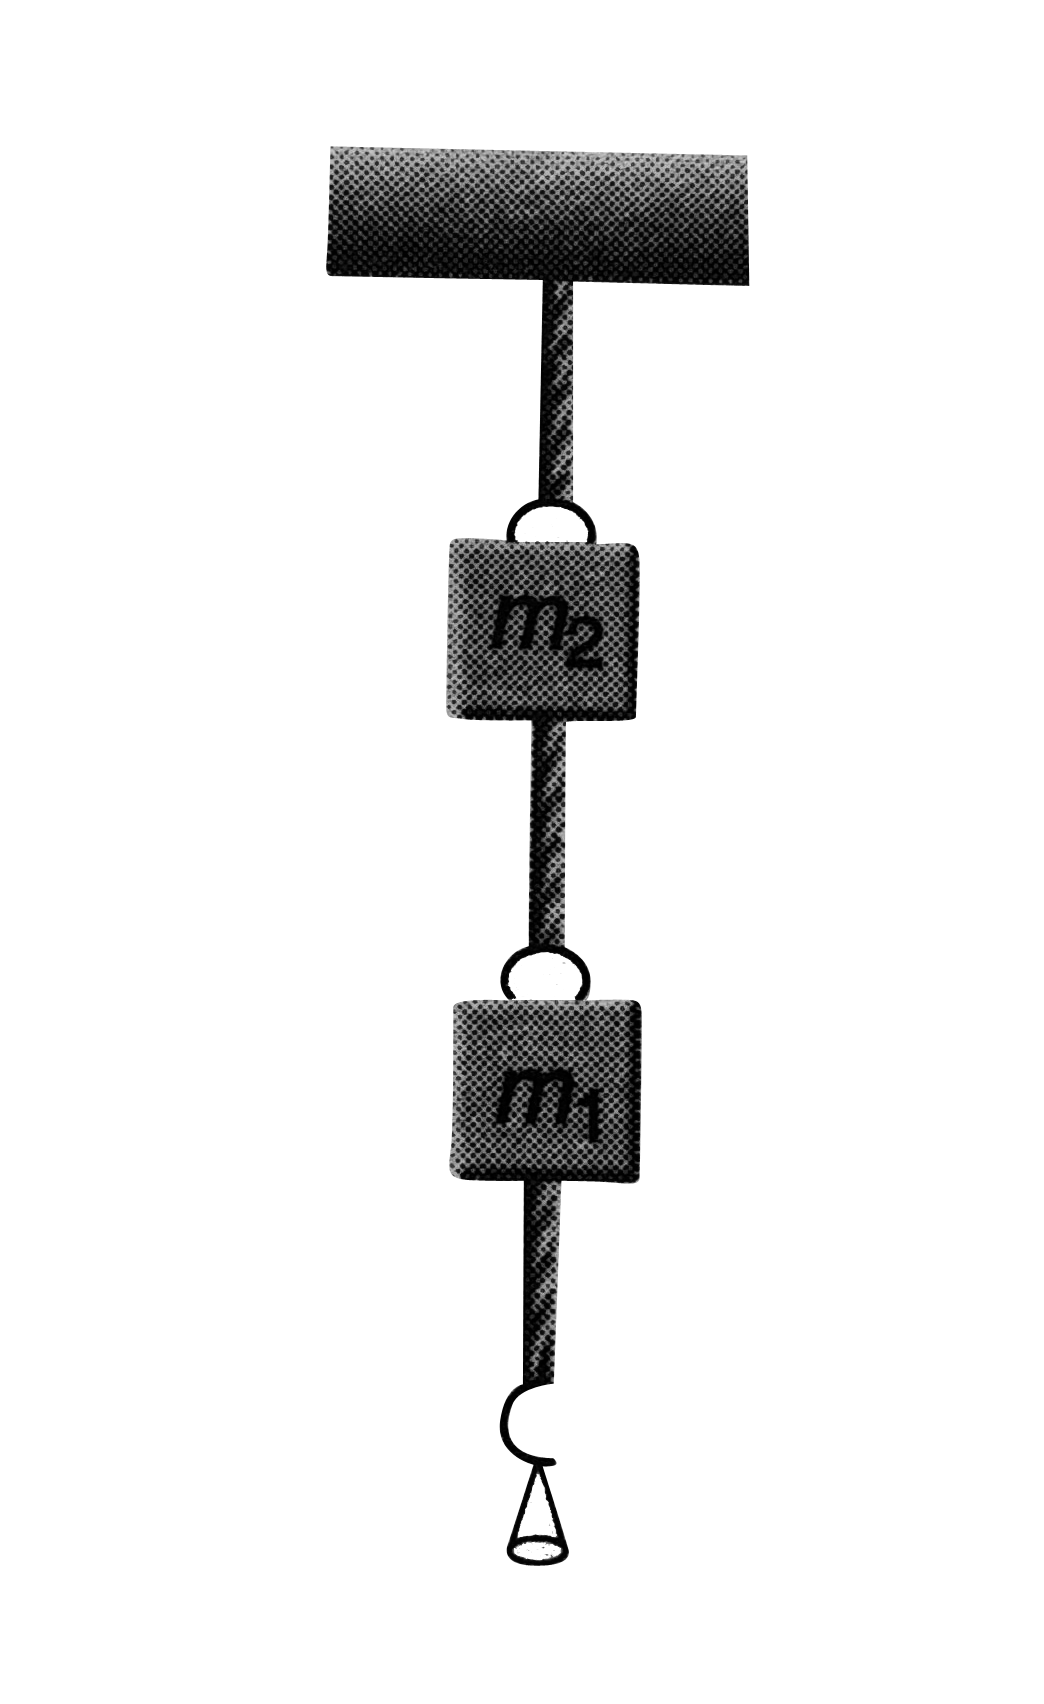 Two wires shown in figure are made of the same material which has a breaking stress of 8xx10^(8) N/m^(2).  The area of cross- section of the upper wire is 0.006 cm^(2) and that of the  lower wire is 0.003 cm^(2). The mass m(1) = 10 kg, m(2) = 20 kg  and the hanger is light . Find the maximum load that can be put on the hanger without breaking a wire. Which wire will break first  if the load is increased ? ( Take g = 10 m//s^(2))